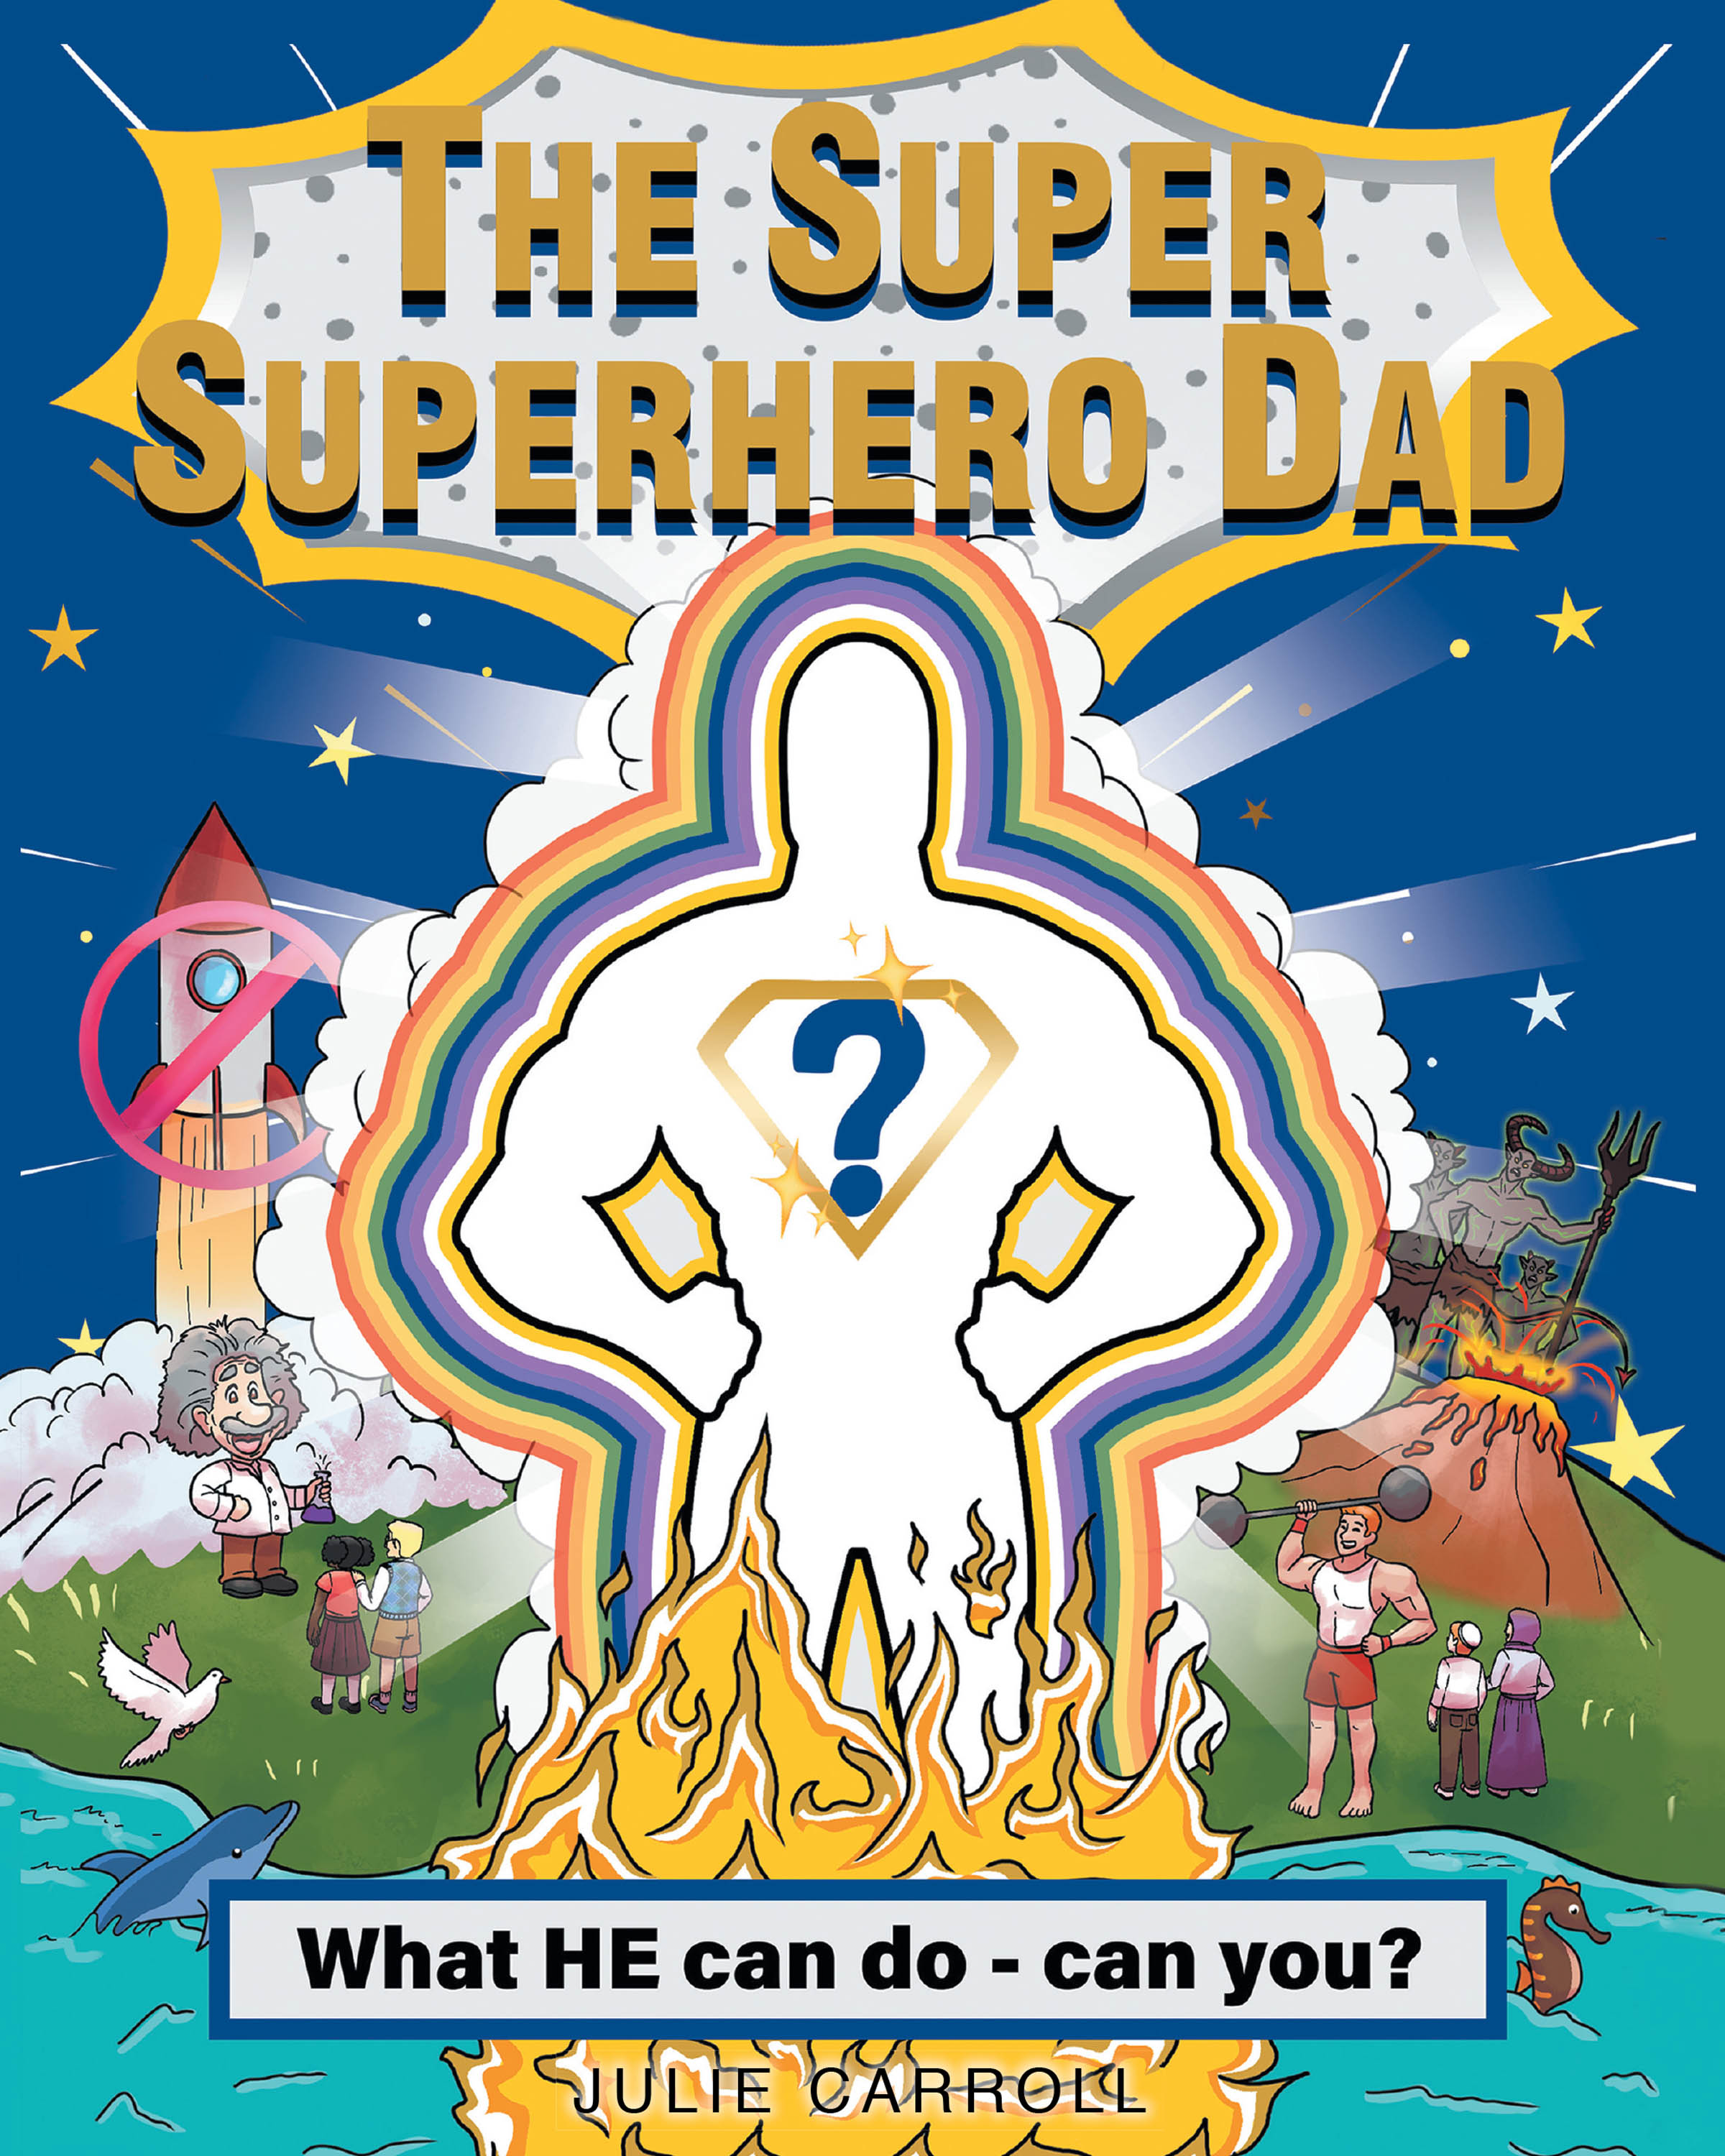 Julie Carroll’s Newly Released “The Super Superhero Dad: What HE can do - can you?” is a Charming Tale of the Wonders of God